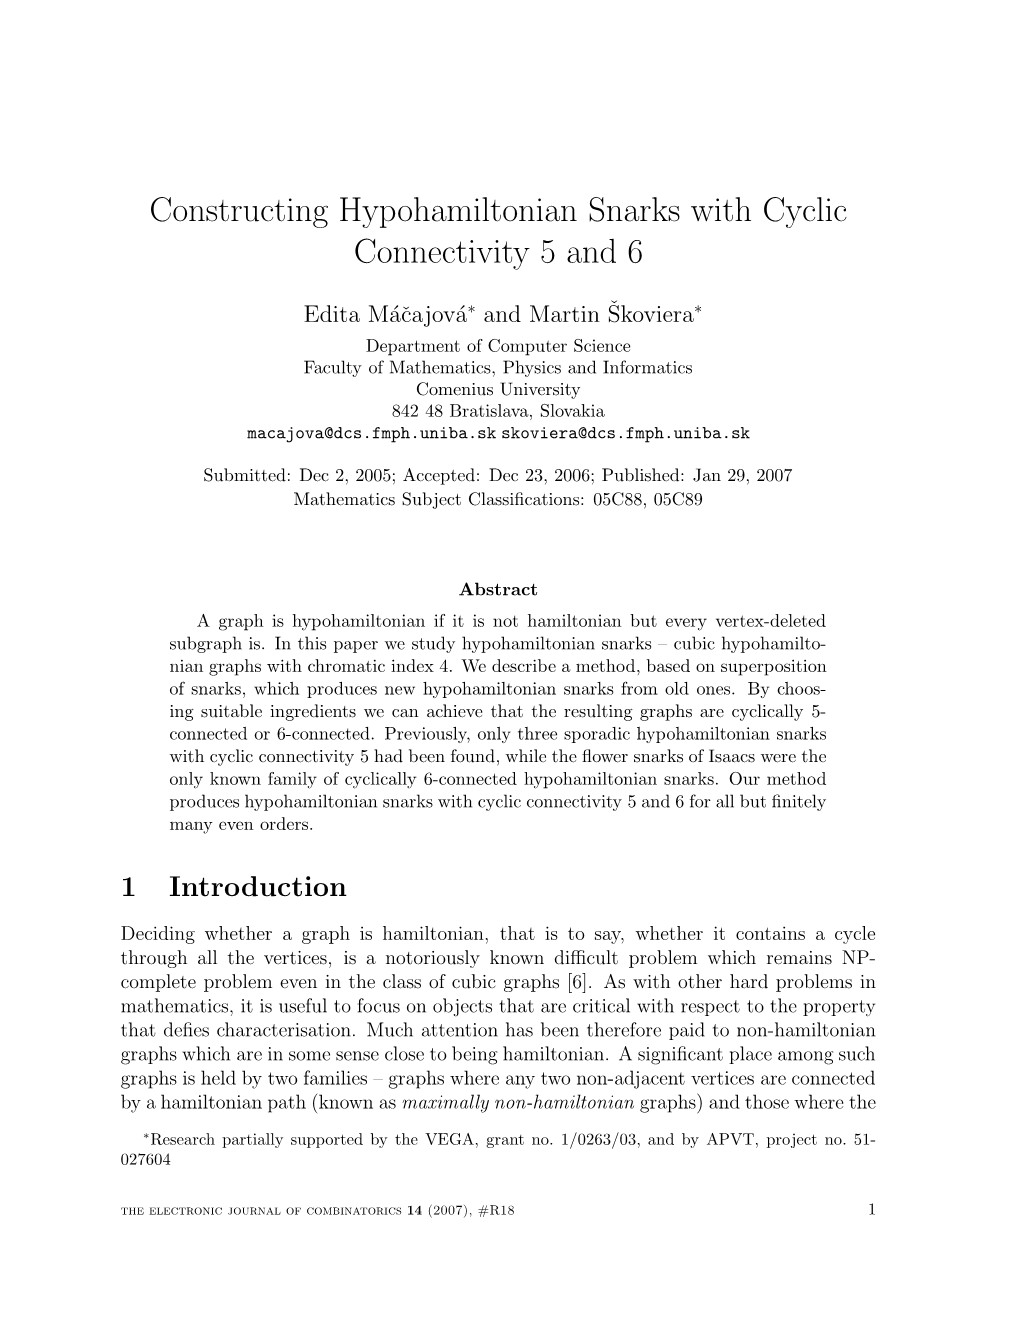 Constructing Hypohamiltonian Snarks with Cyclic Connectivity 5 and 6